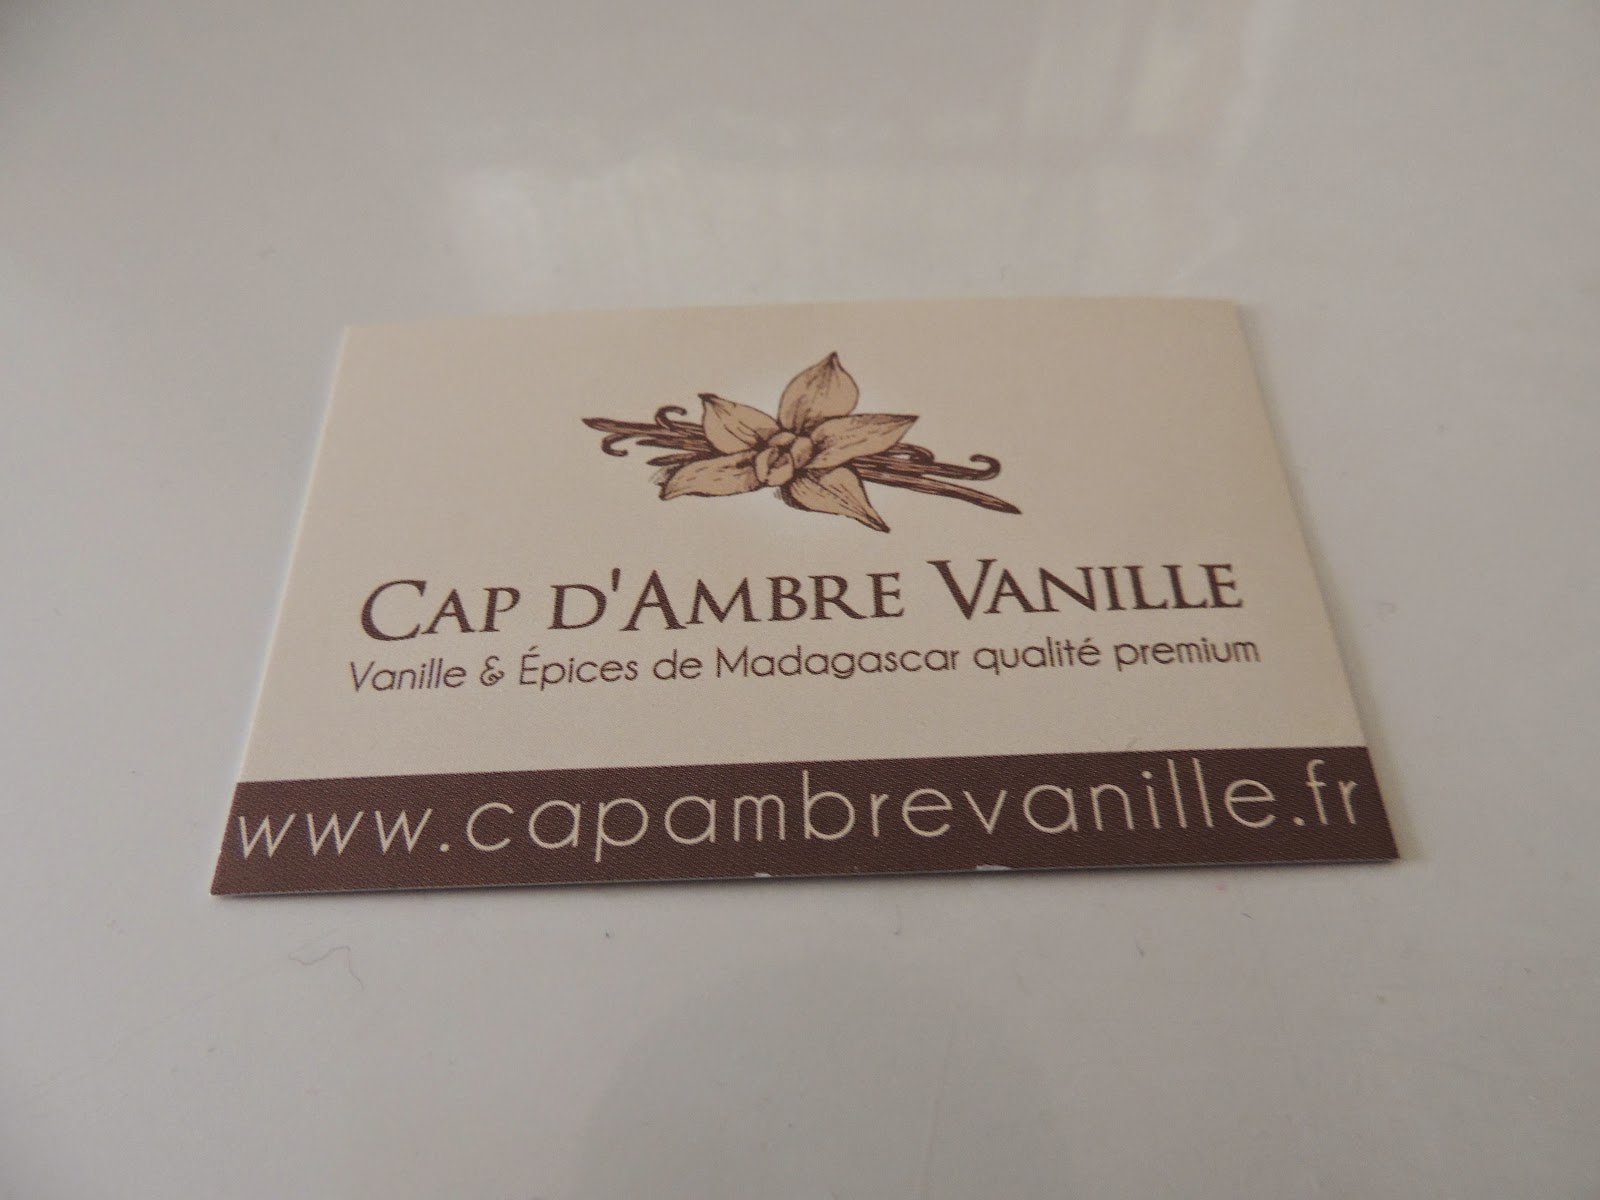 http://www.capambrevanille.fr/